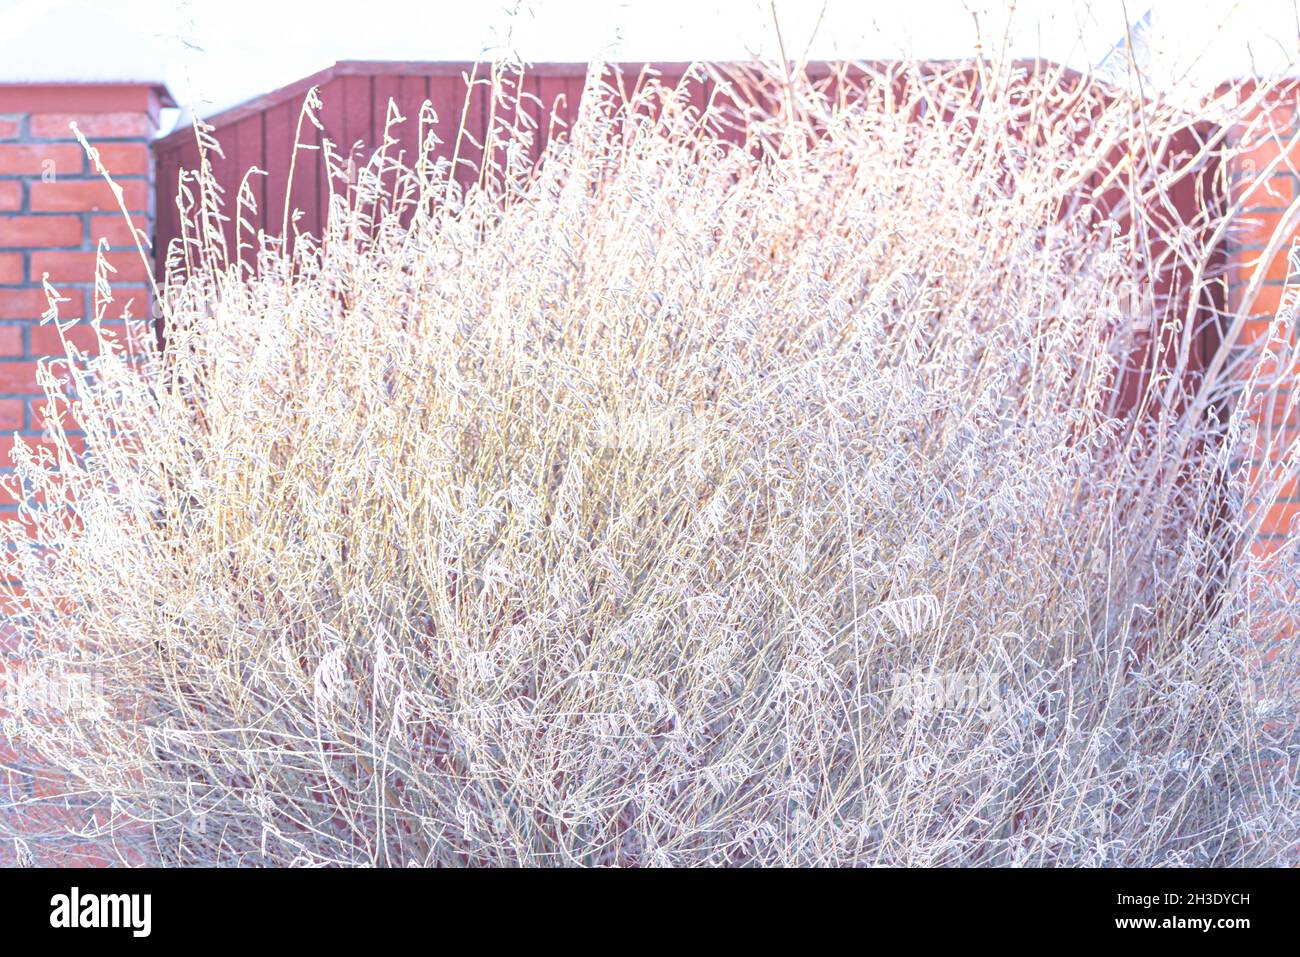 Lush wild grass covered with hoarfrost against yard fence Stock Photo